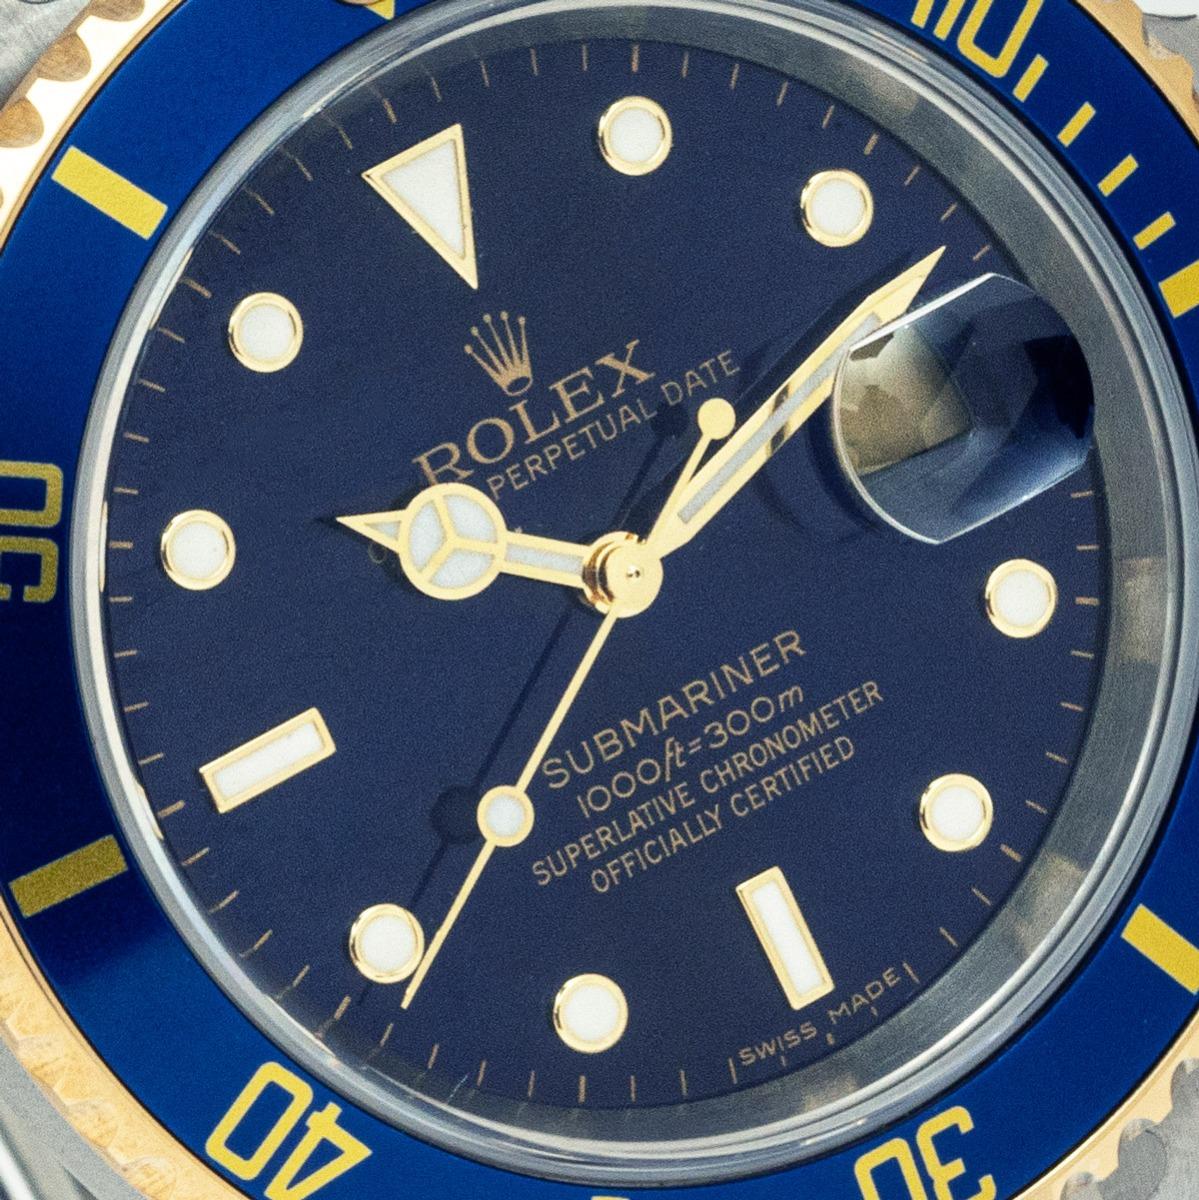 Rolex Submariner Date Nos Stainless Steel & Yellow Gold Blue Dial 16613 In New Condition For Sale In London, GB